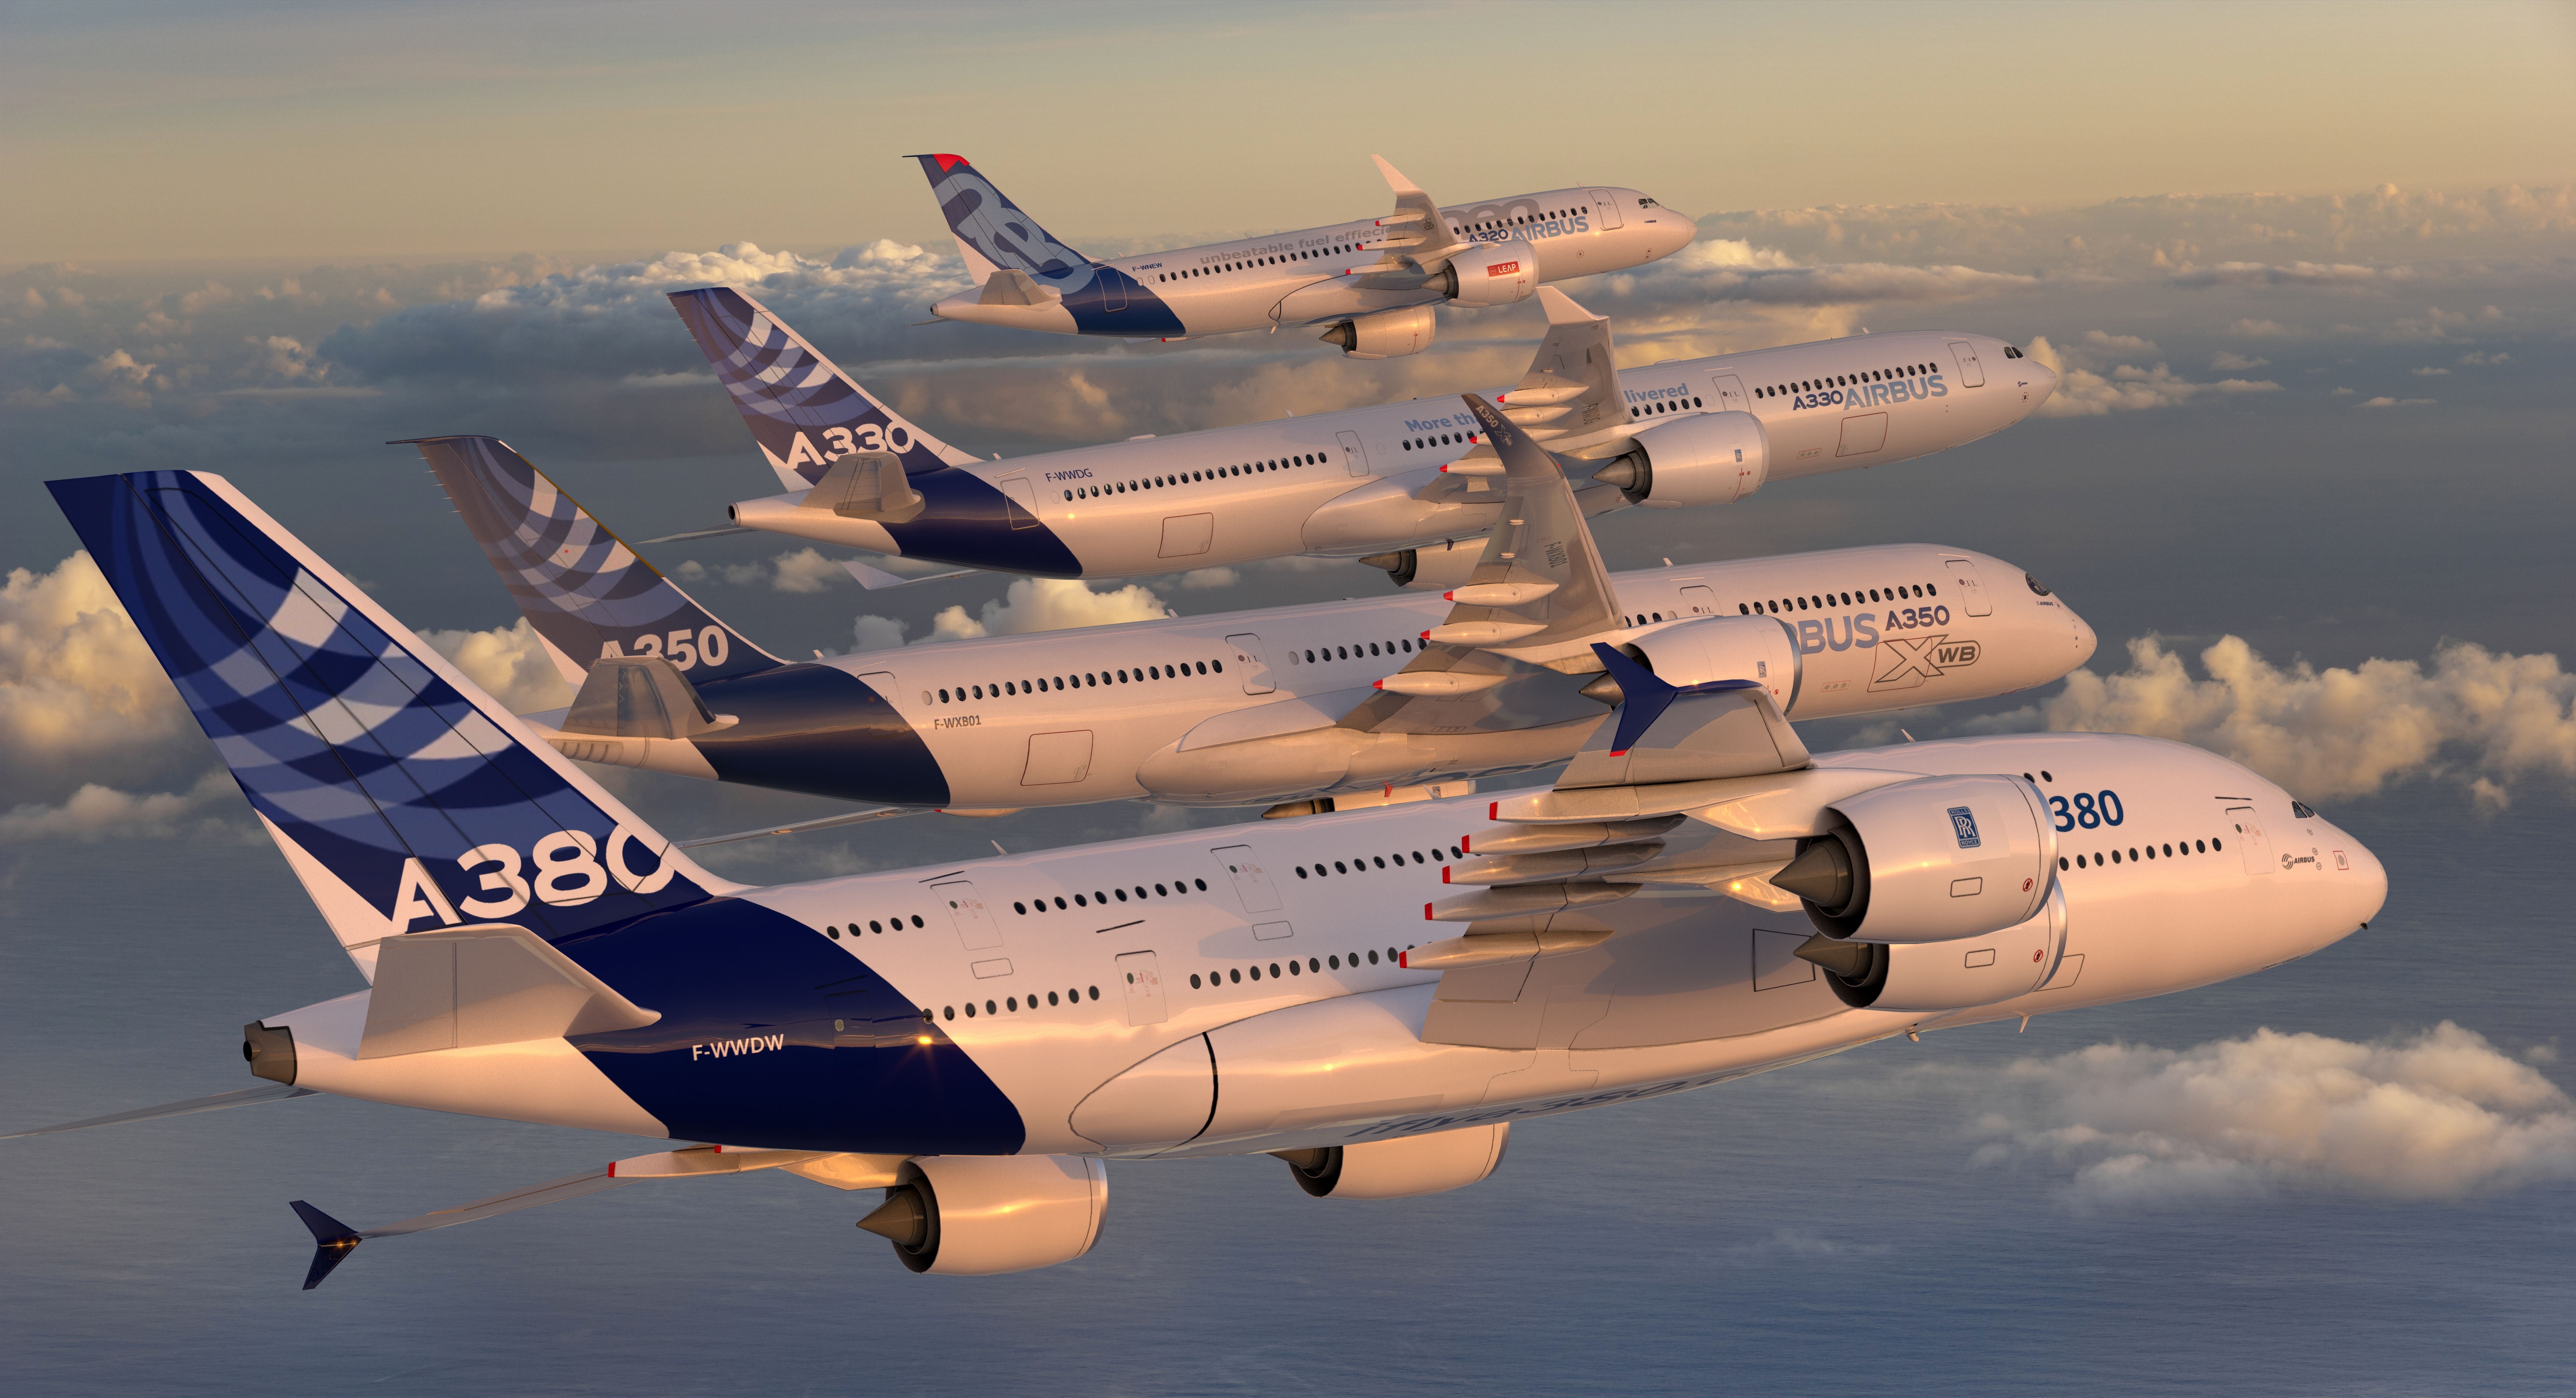 An Airbus A380, A350, A330, and A320 flying together above the clouds.